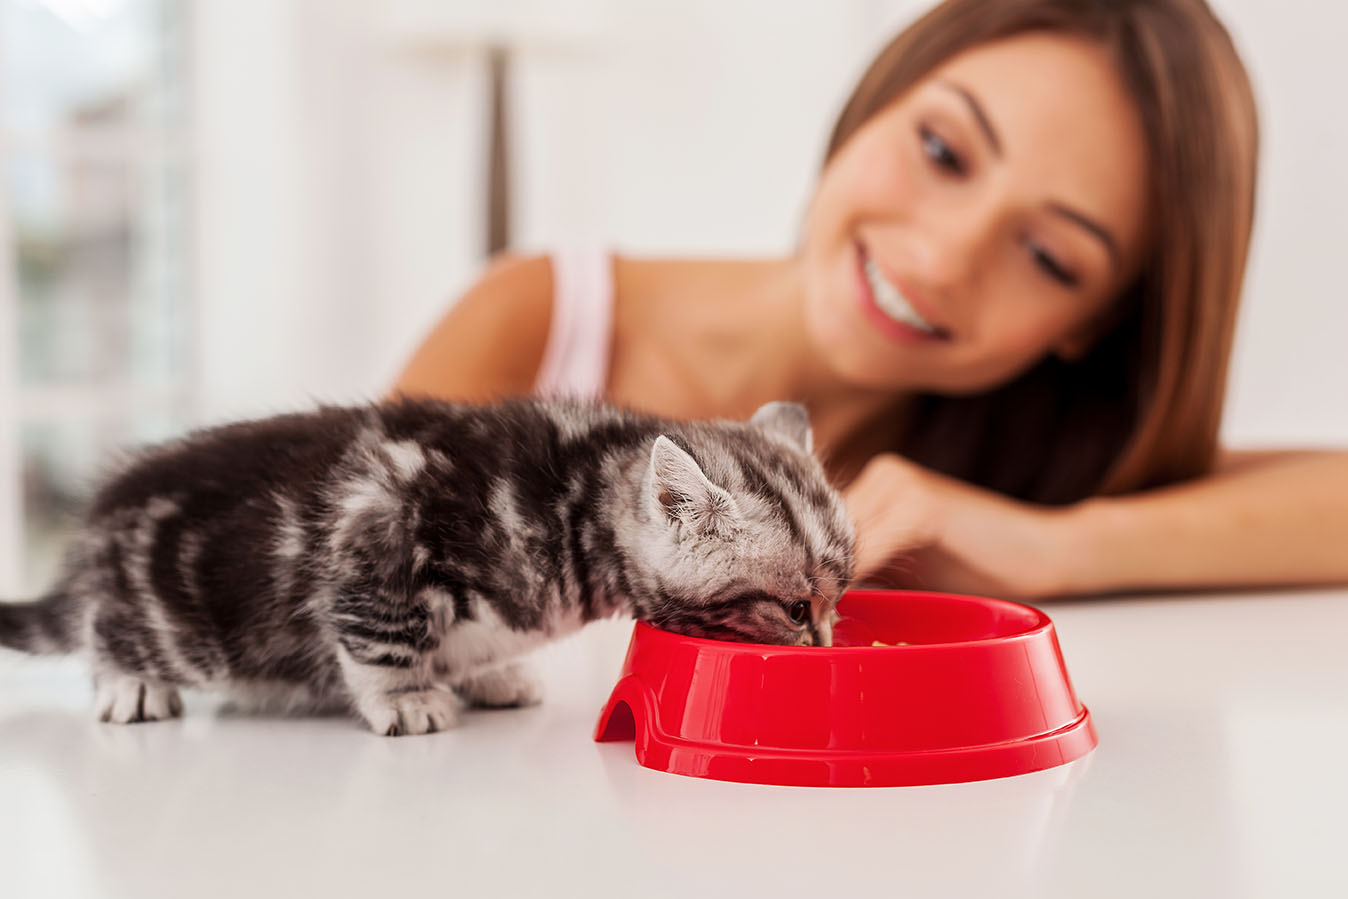 Taking good care of her pet. Little kitten eating food from the bowl while beautiful young woman looking at it and smiling